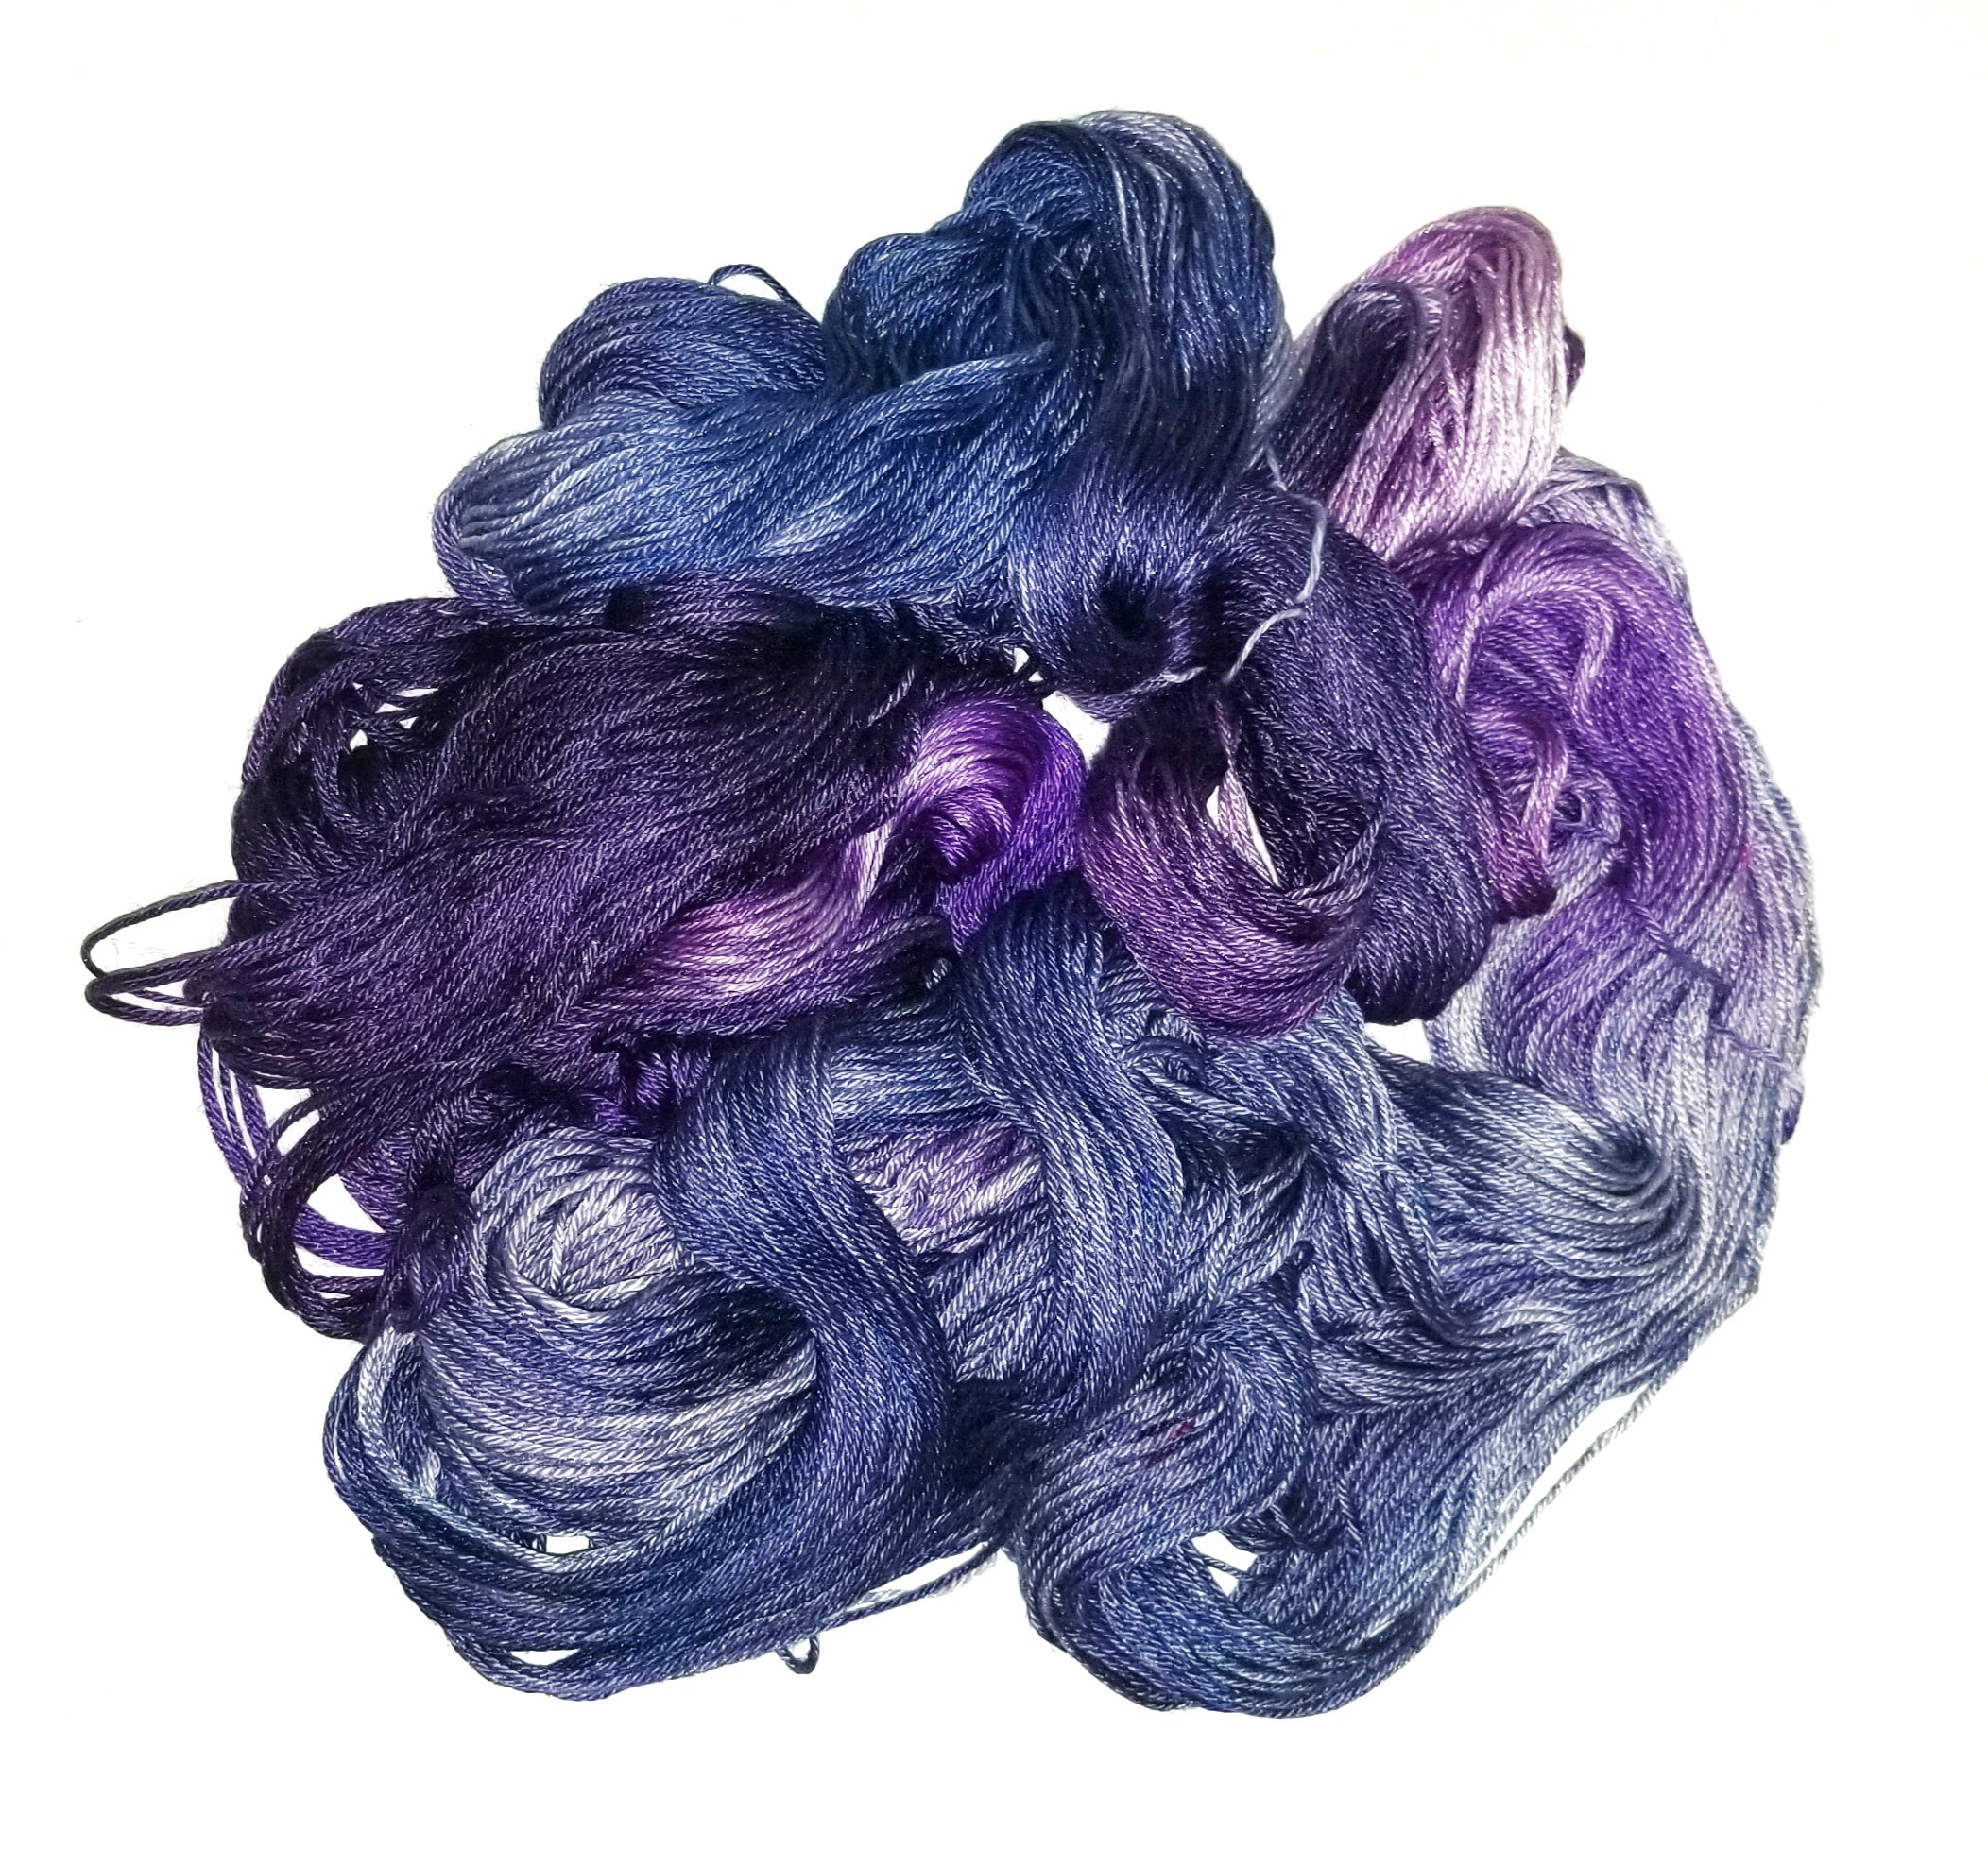 Purple and white variegated OmegaCrys baby weight yarn, 1.4 ounce ball